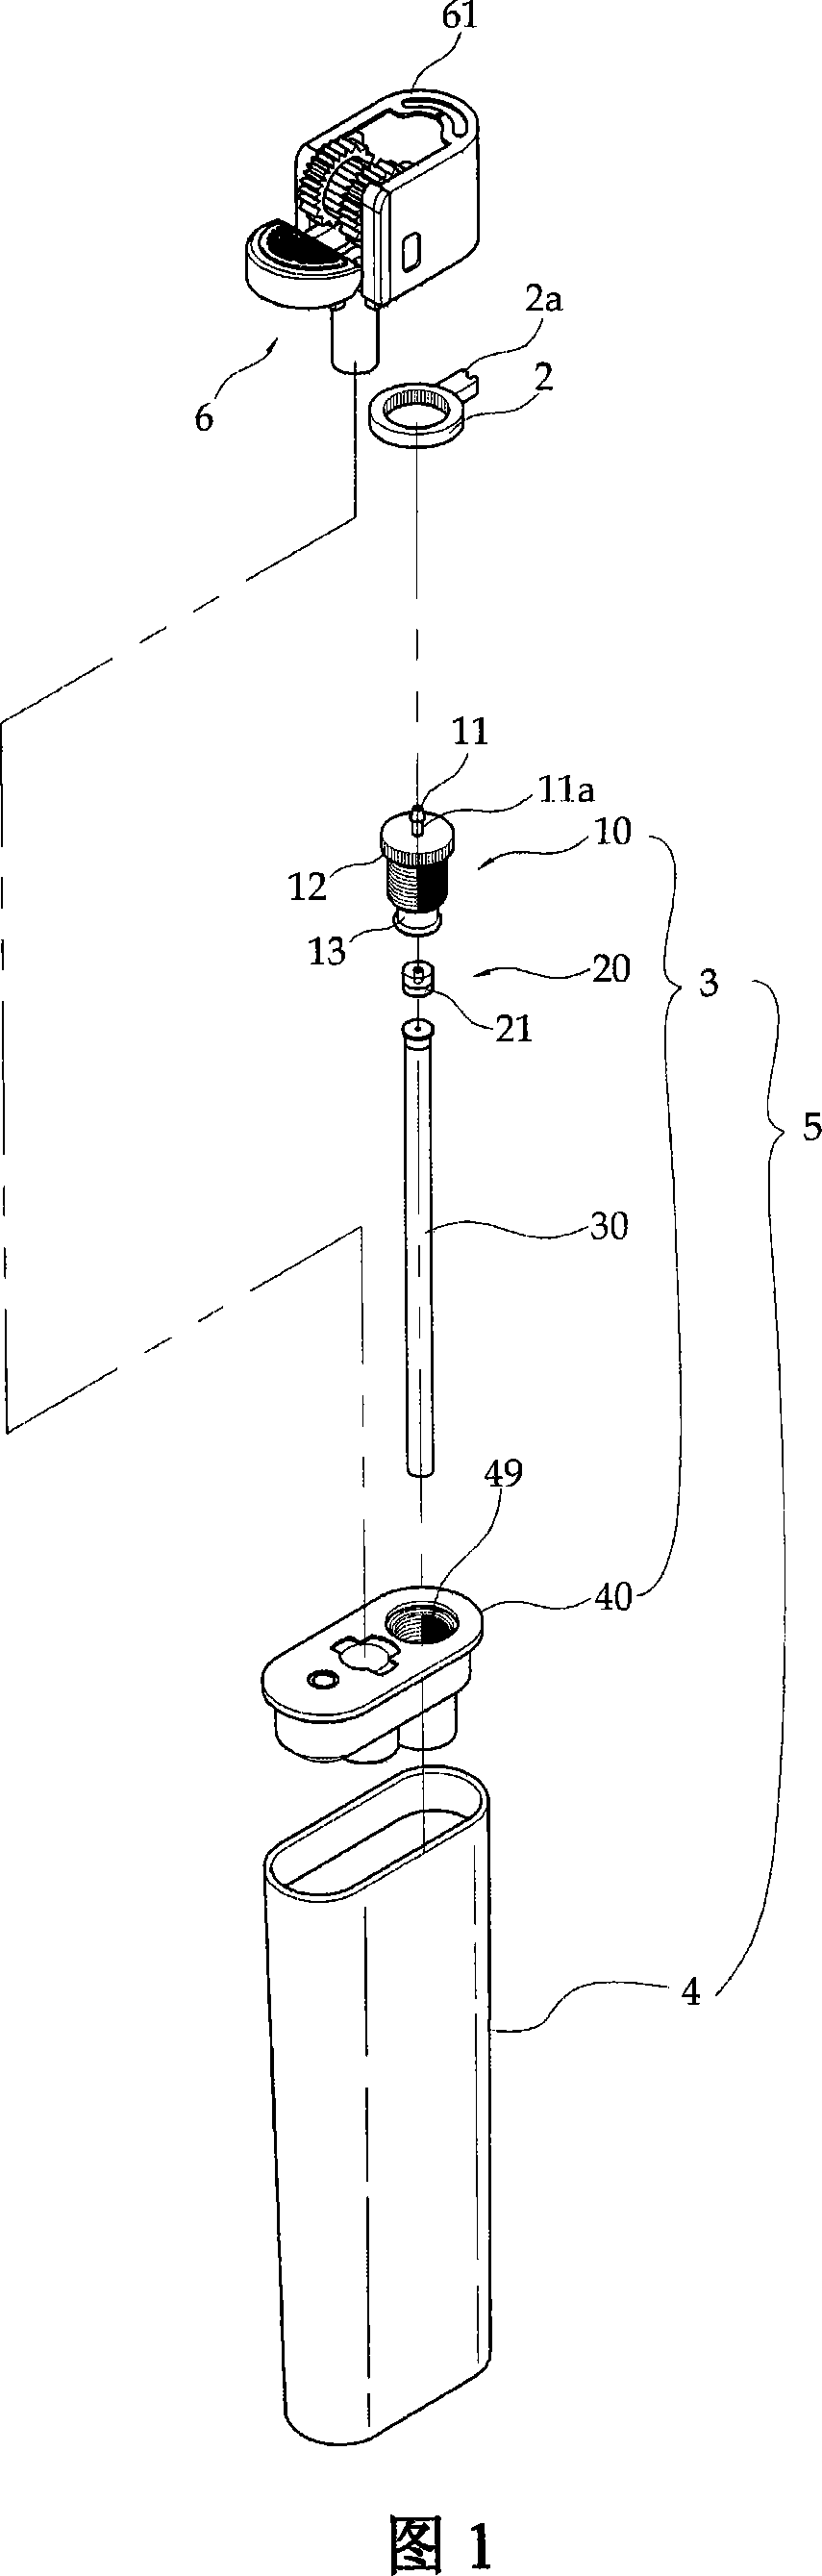 An apparatus for adjusting the flame-height of disposable gas lighters